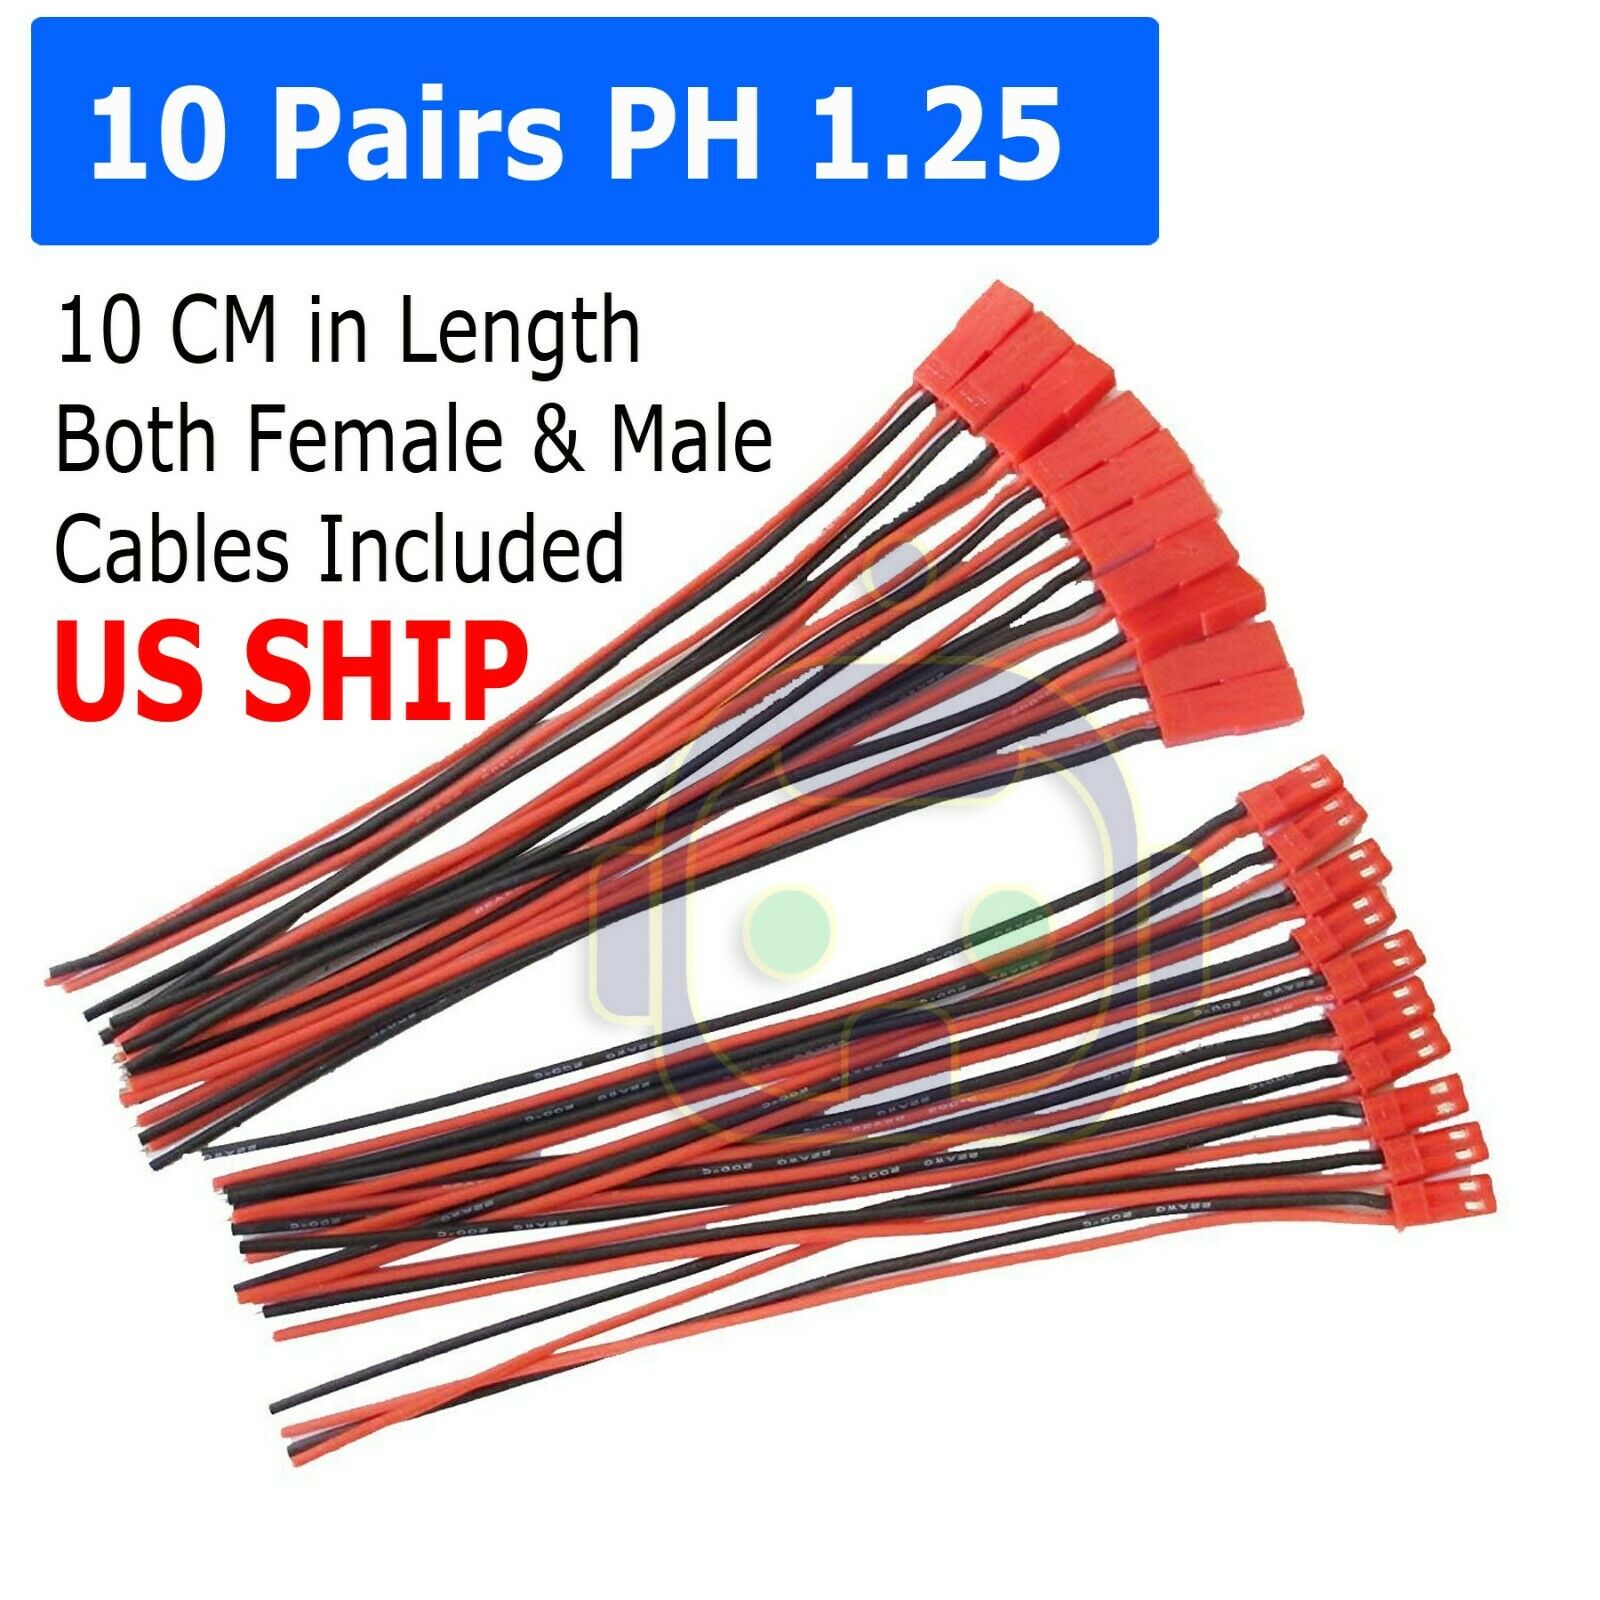 10 pairs 145mm JST Plug Connector Cable Male & Female RC Lipo Battery 1.25 PH